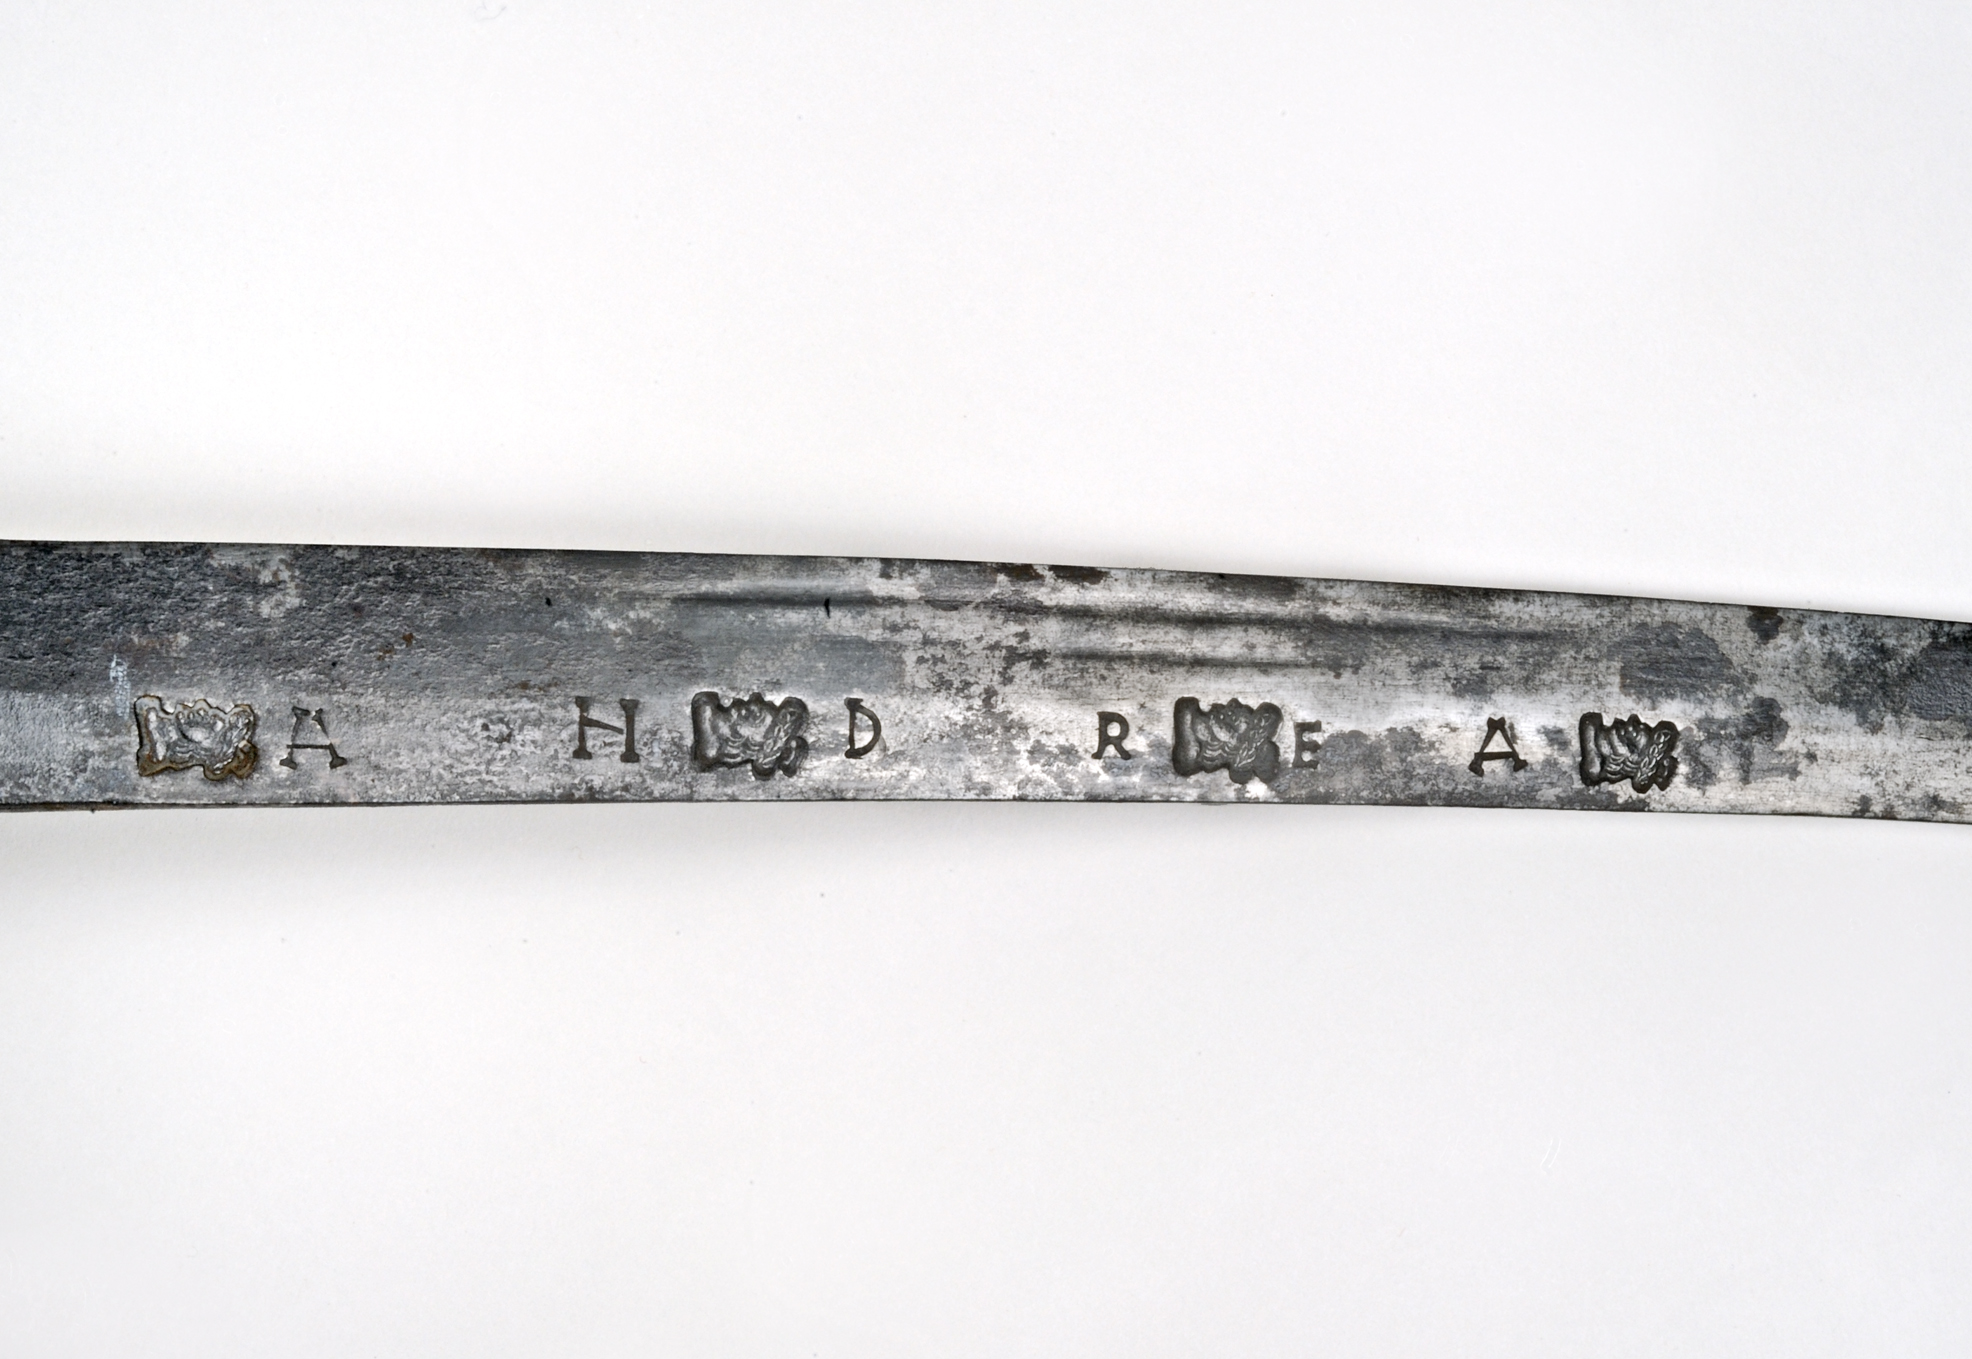 Detail of a slightly curved sword blade showing stamped letters and marks